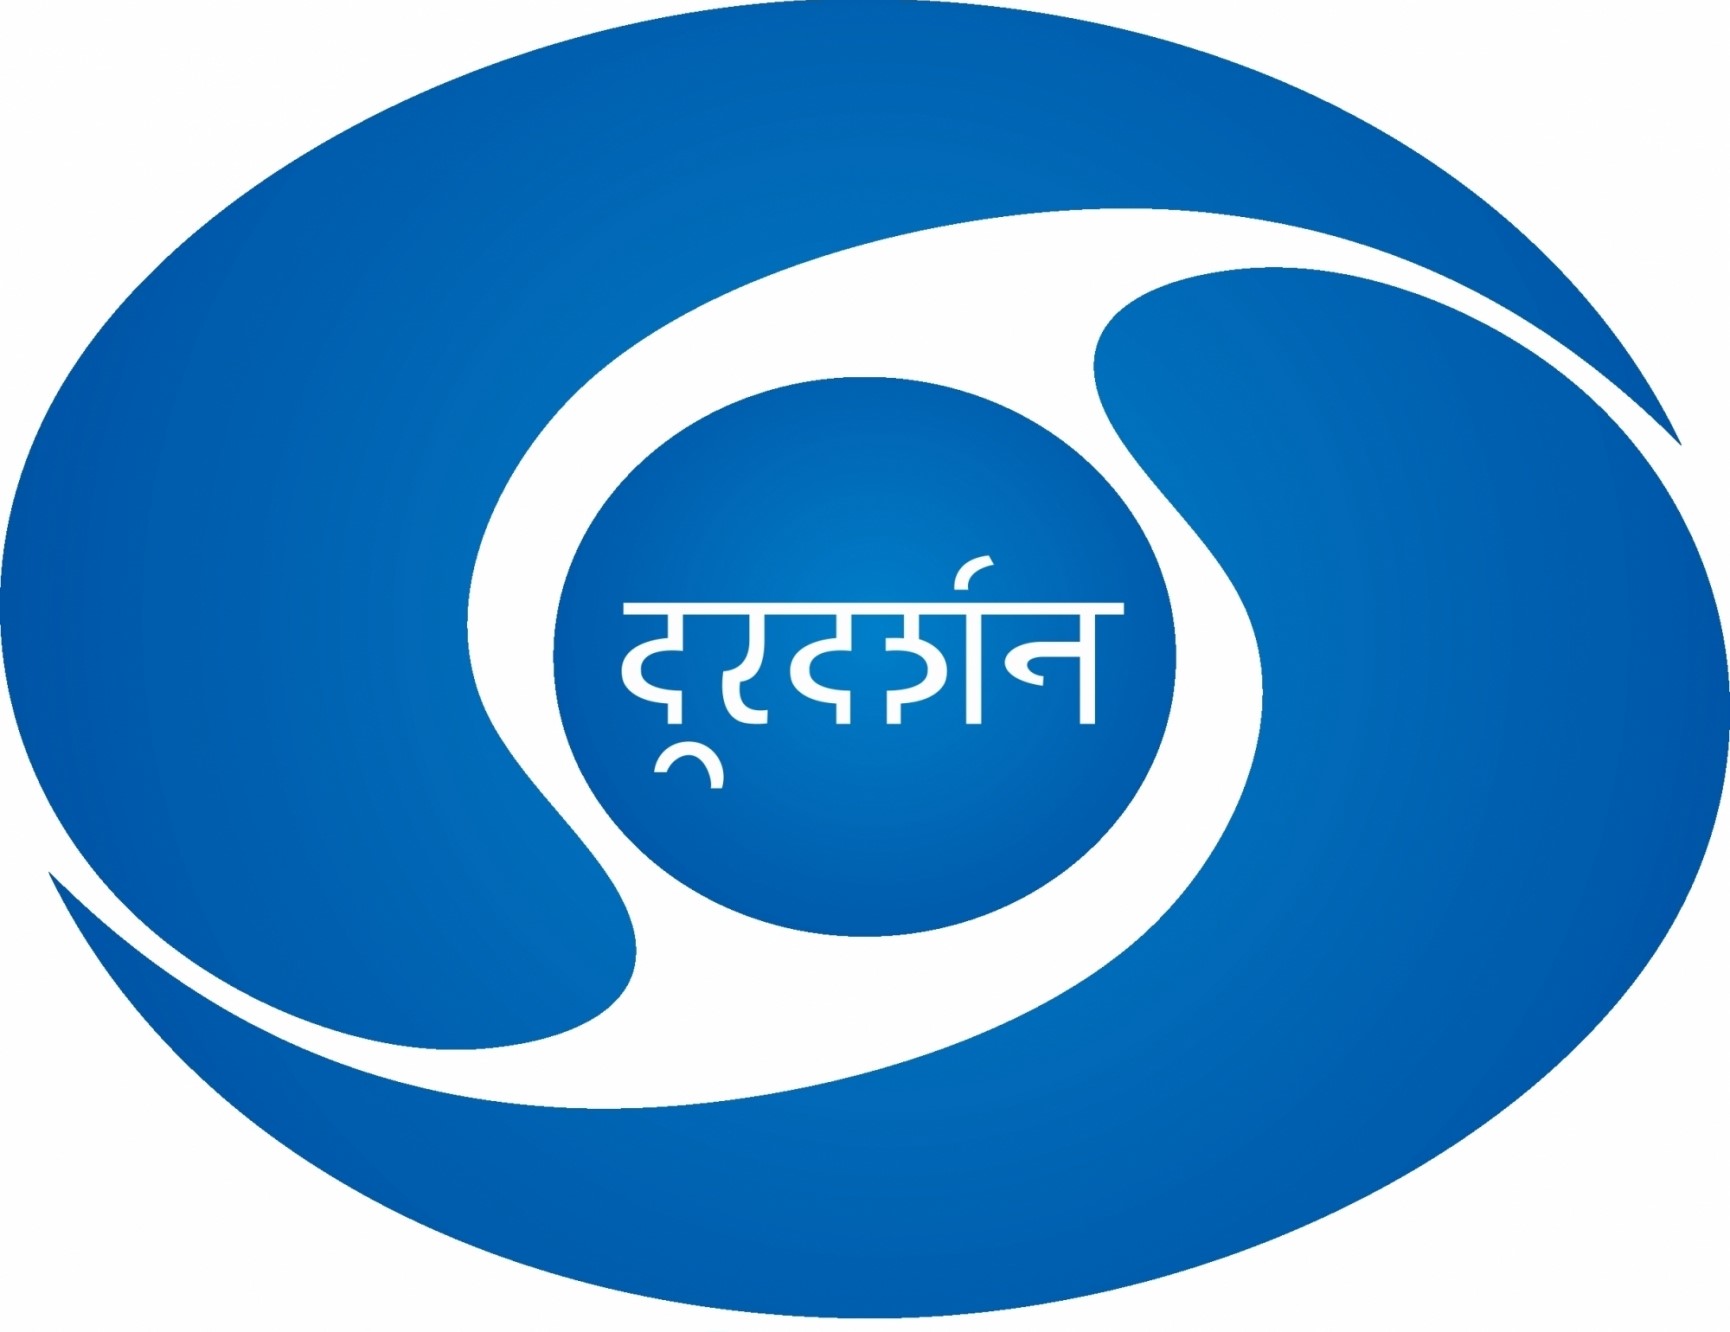 Nepal stops transmission of India's news channels; Doordarshan remains on air